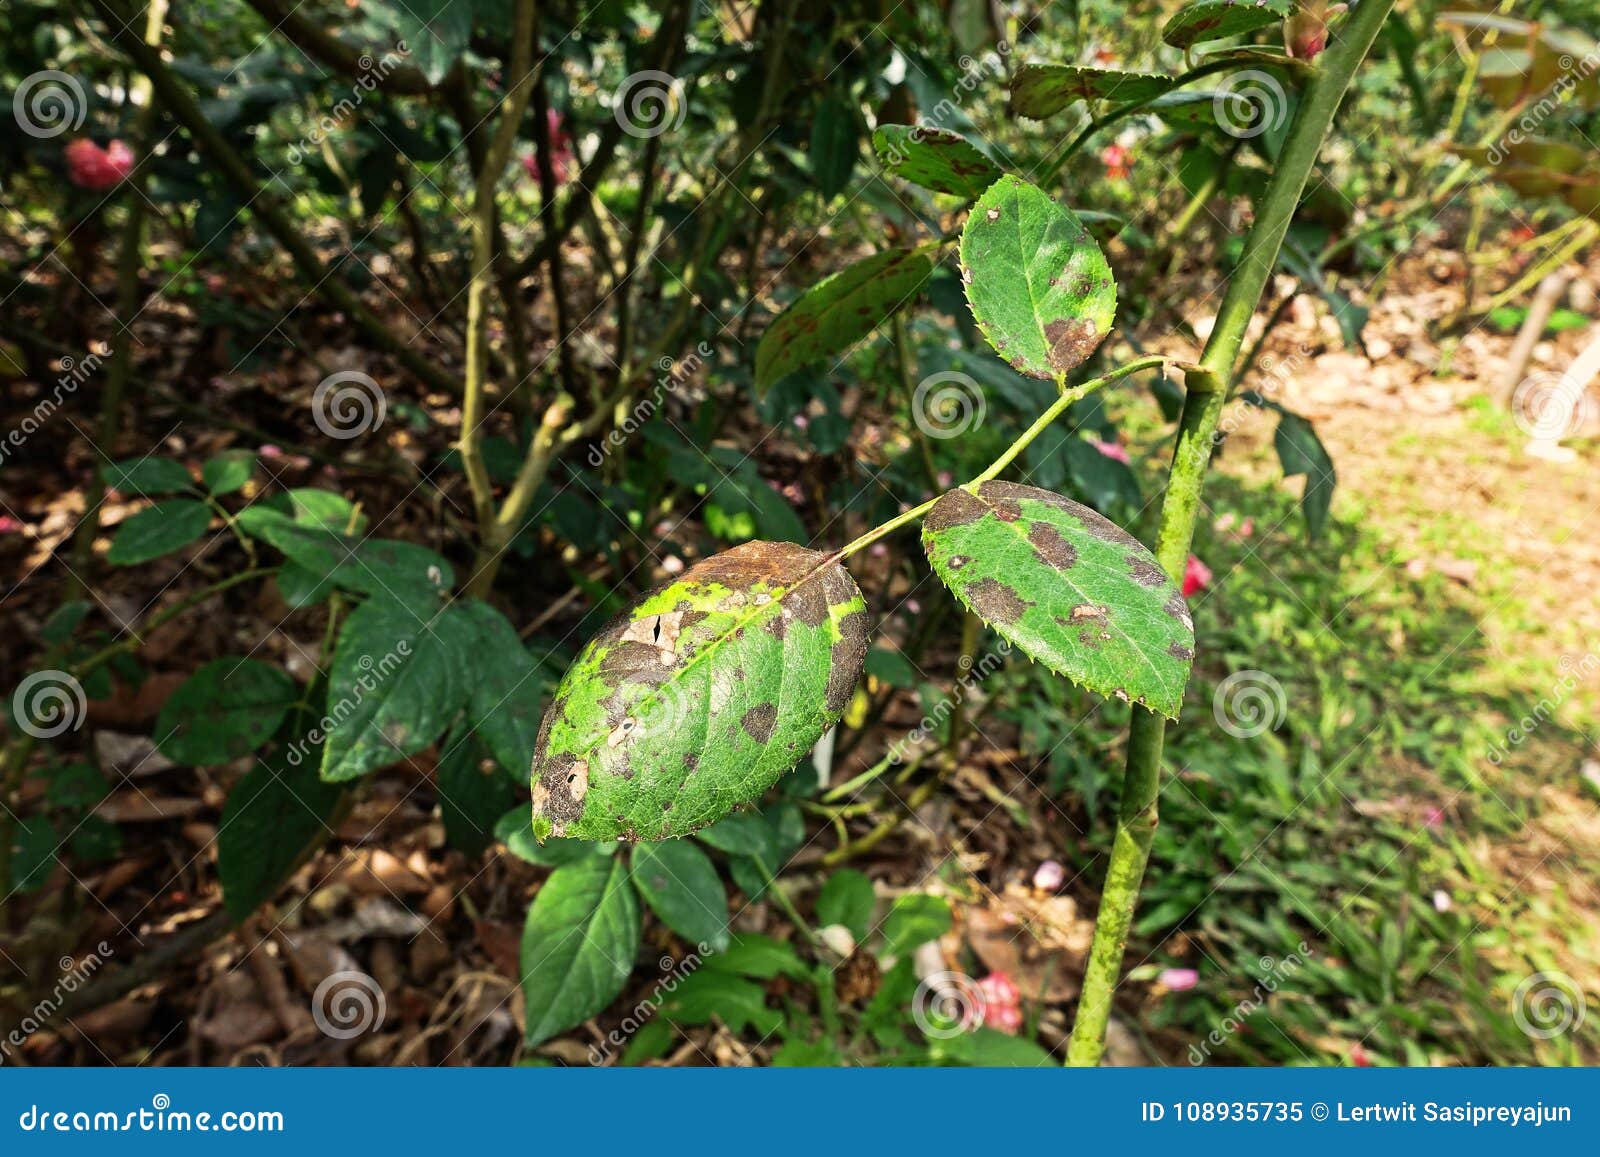 Plant Disease, Fungal Leaves Spot Disease On Roses Causes The Damage On ...